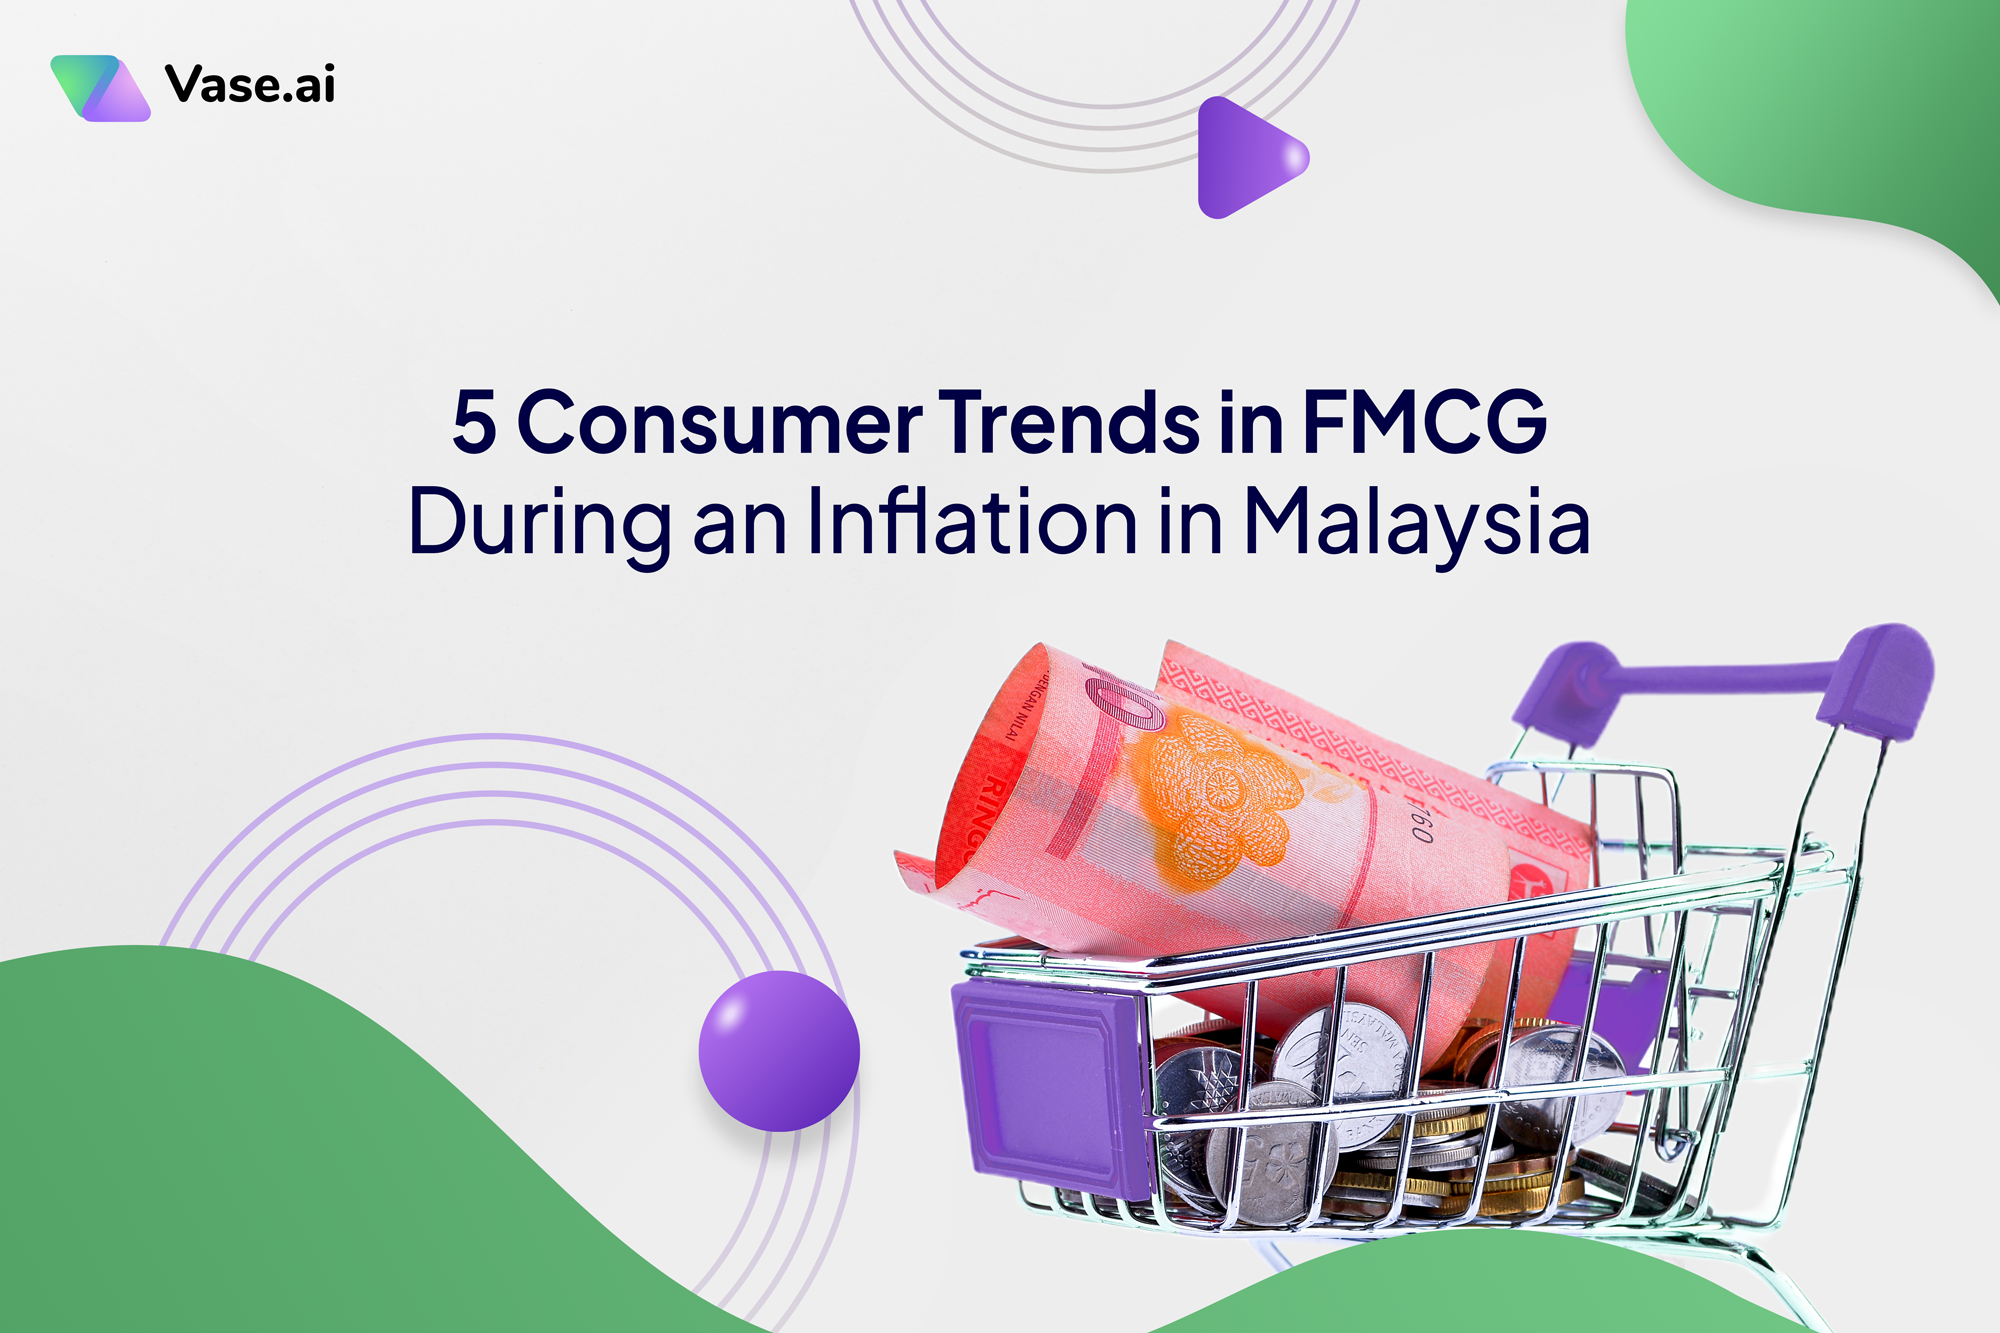 5 Consumer Trends in FMCG During an Inflation in Malaysia